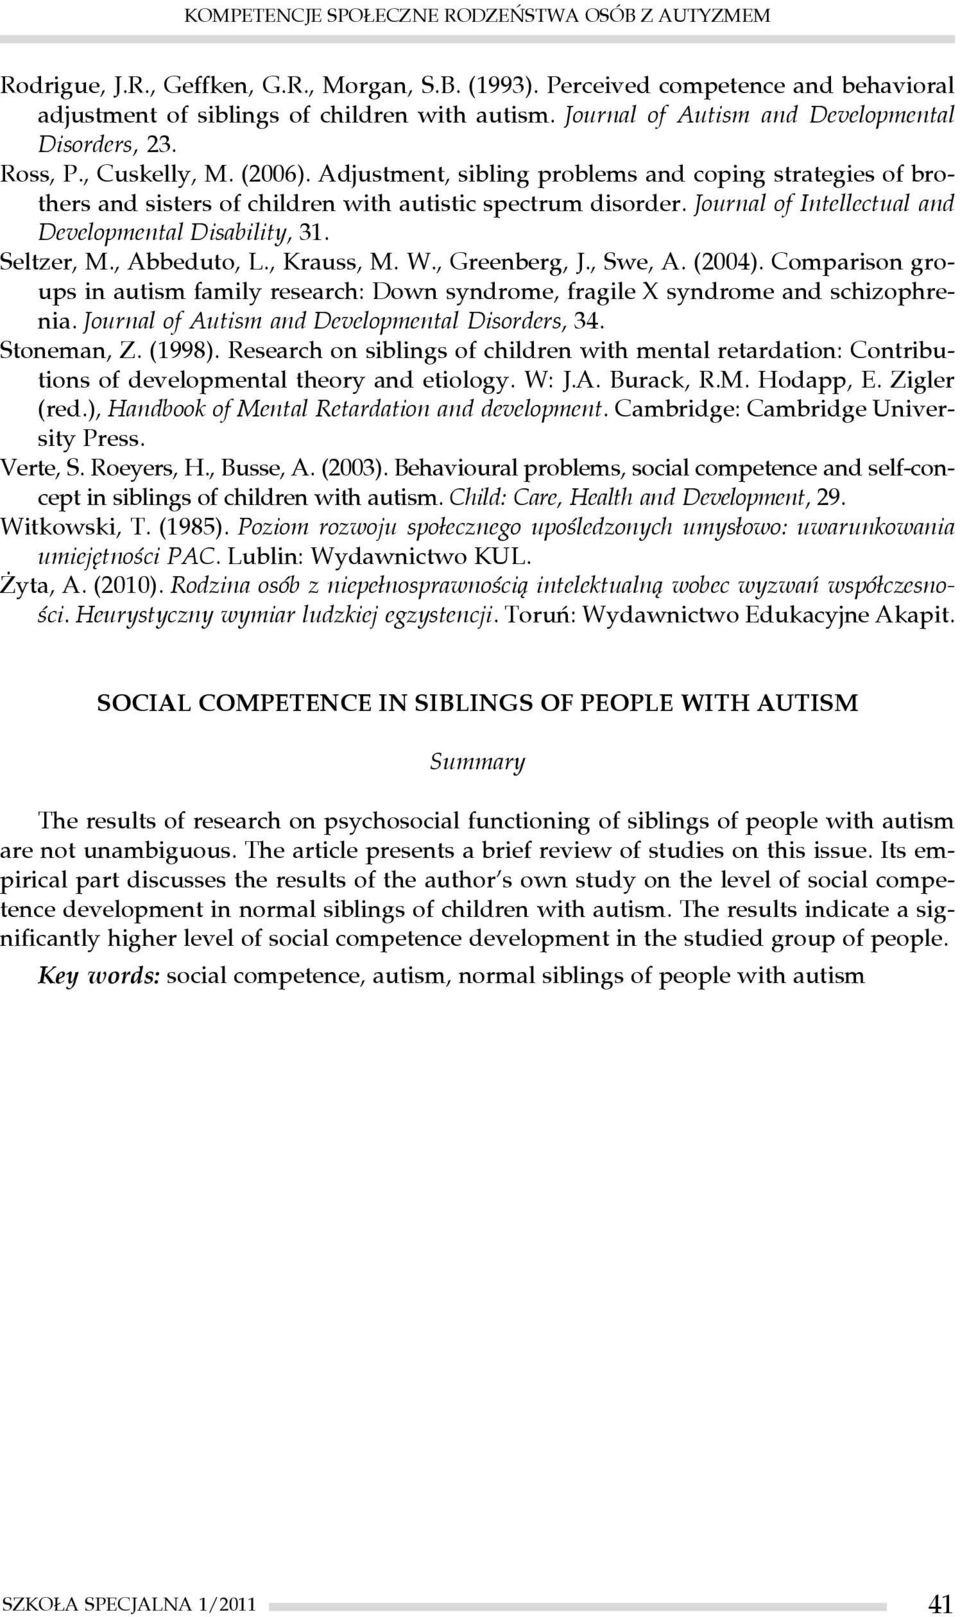 Adjustment, sibling problems and coping strategies of brothers and sisters of children with autistic spectrum disorder. Journal of Intellectual and Developmental Disability, 31. Seltzer, M.